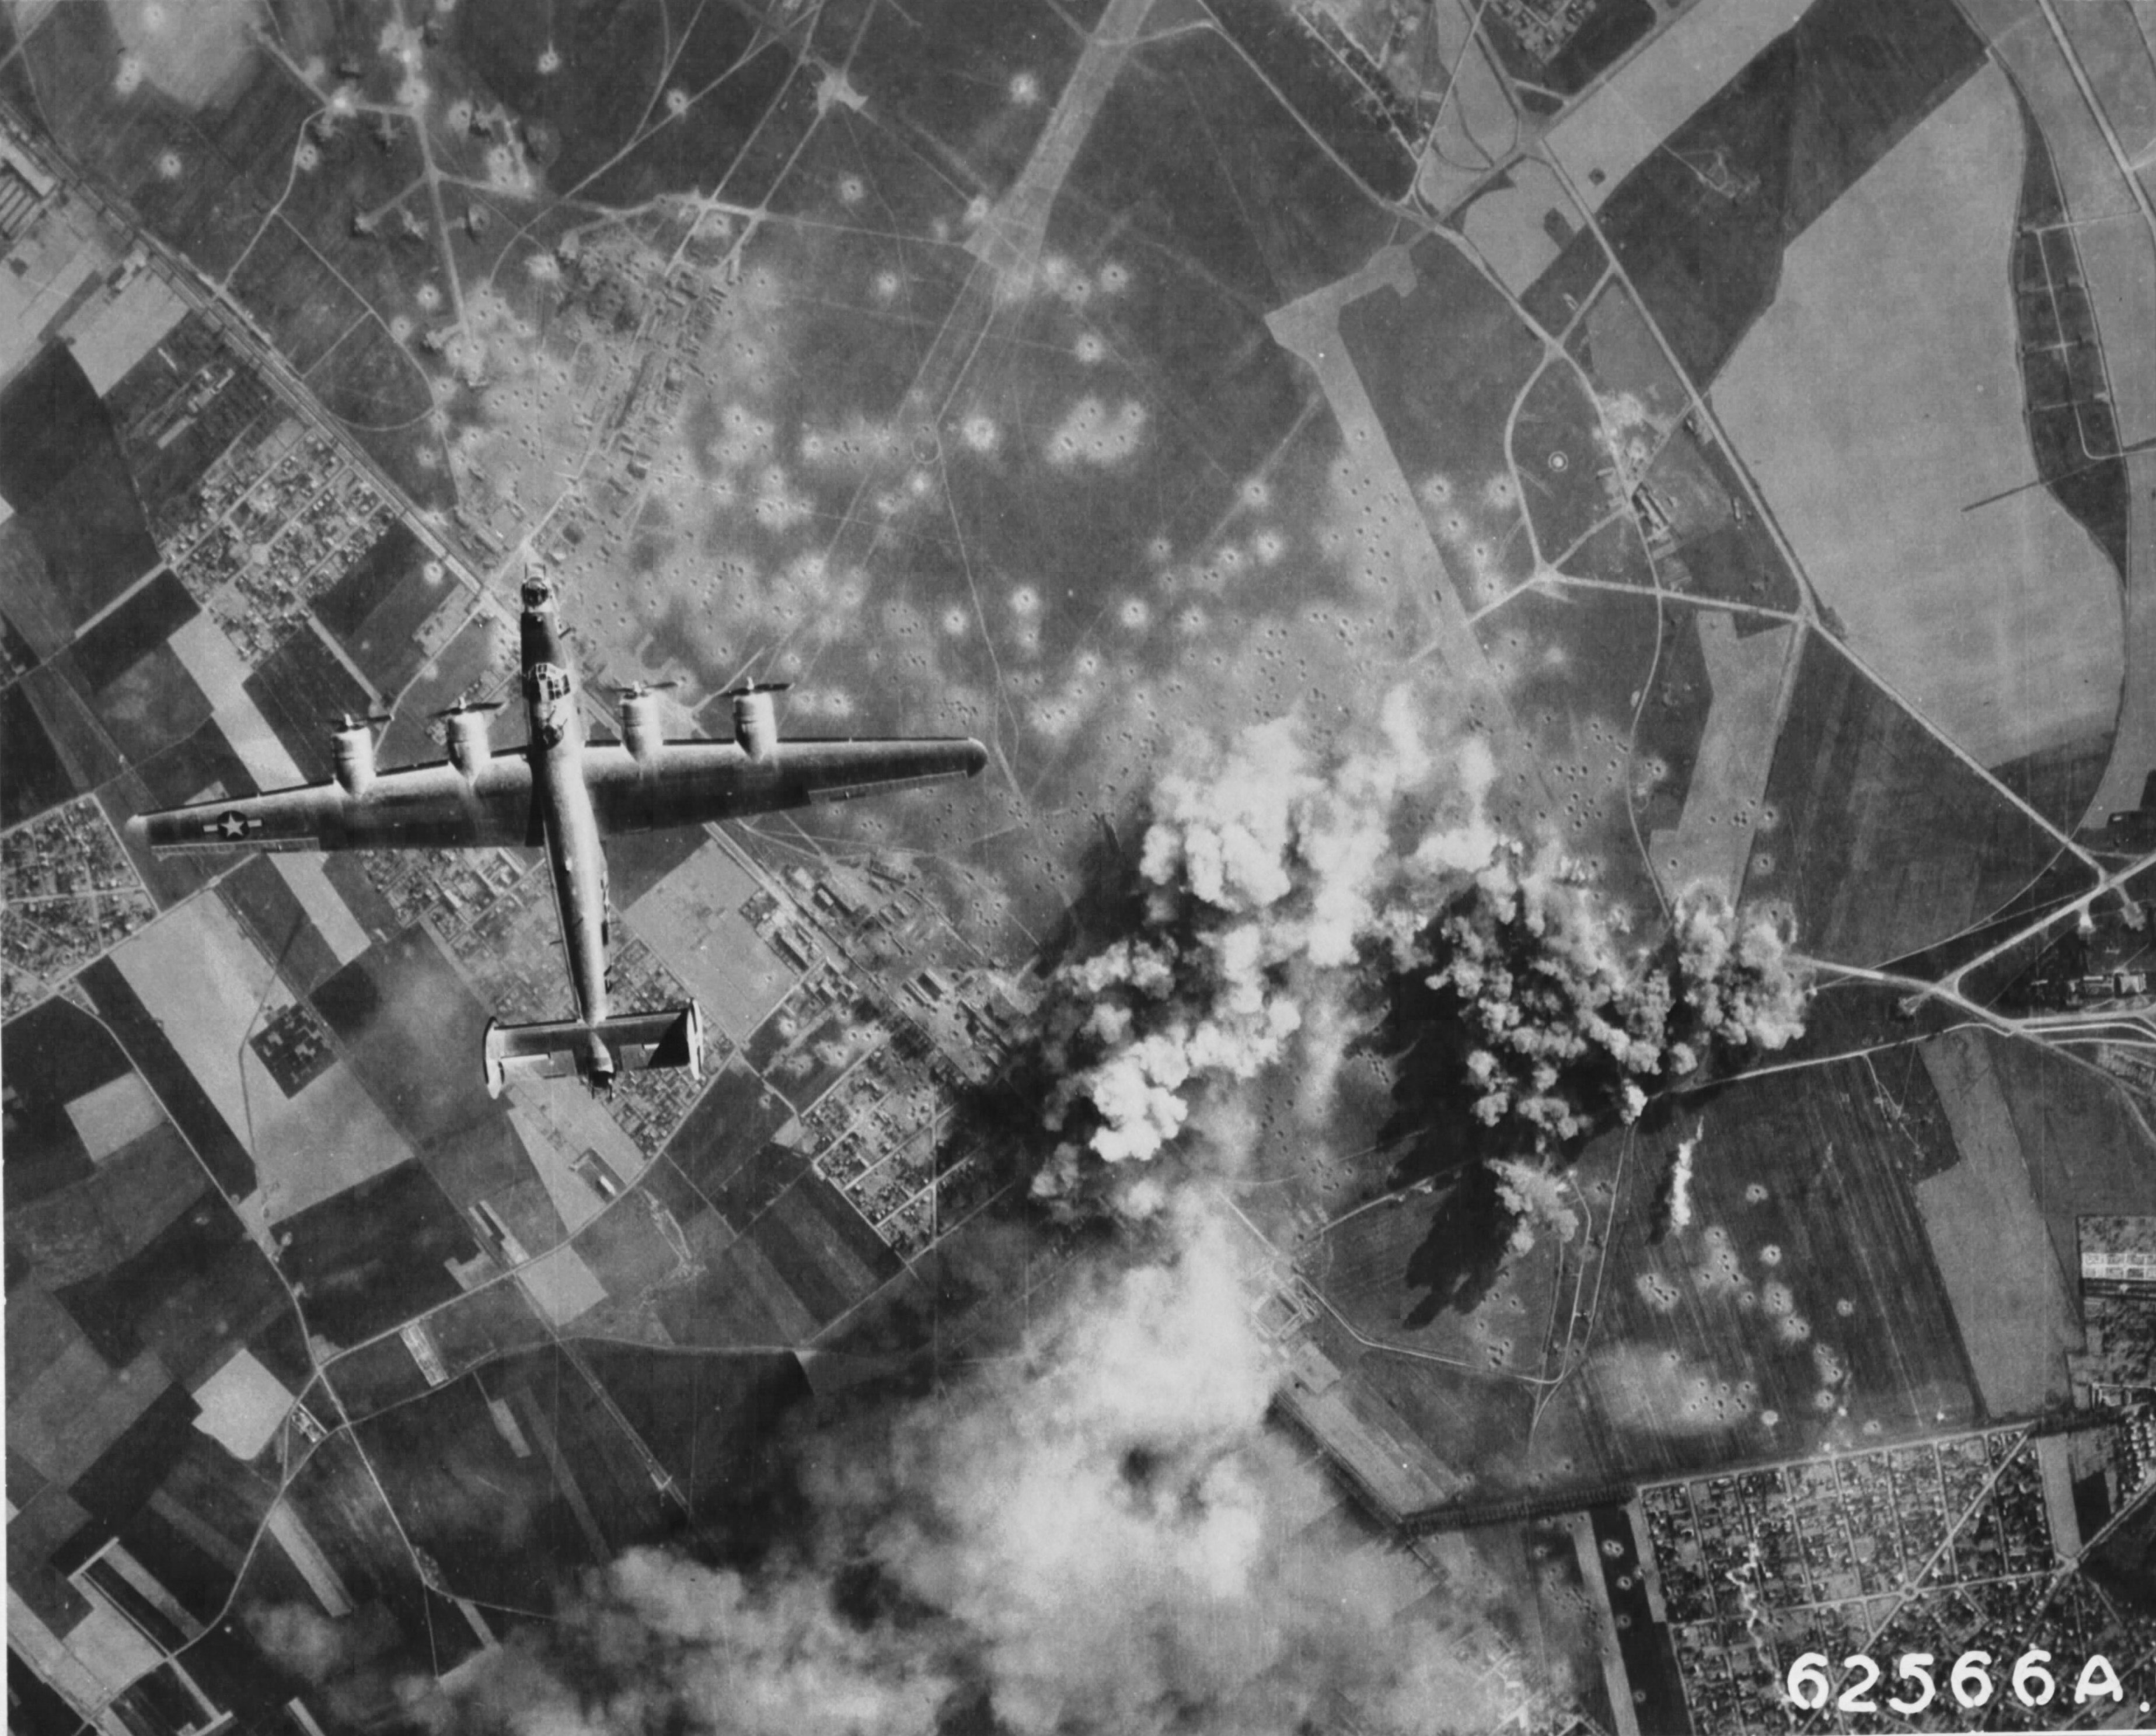 B-24 Liberator of the 705th Bomb Squadron over Orly Airfield, Paris, May 14 1944.